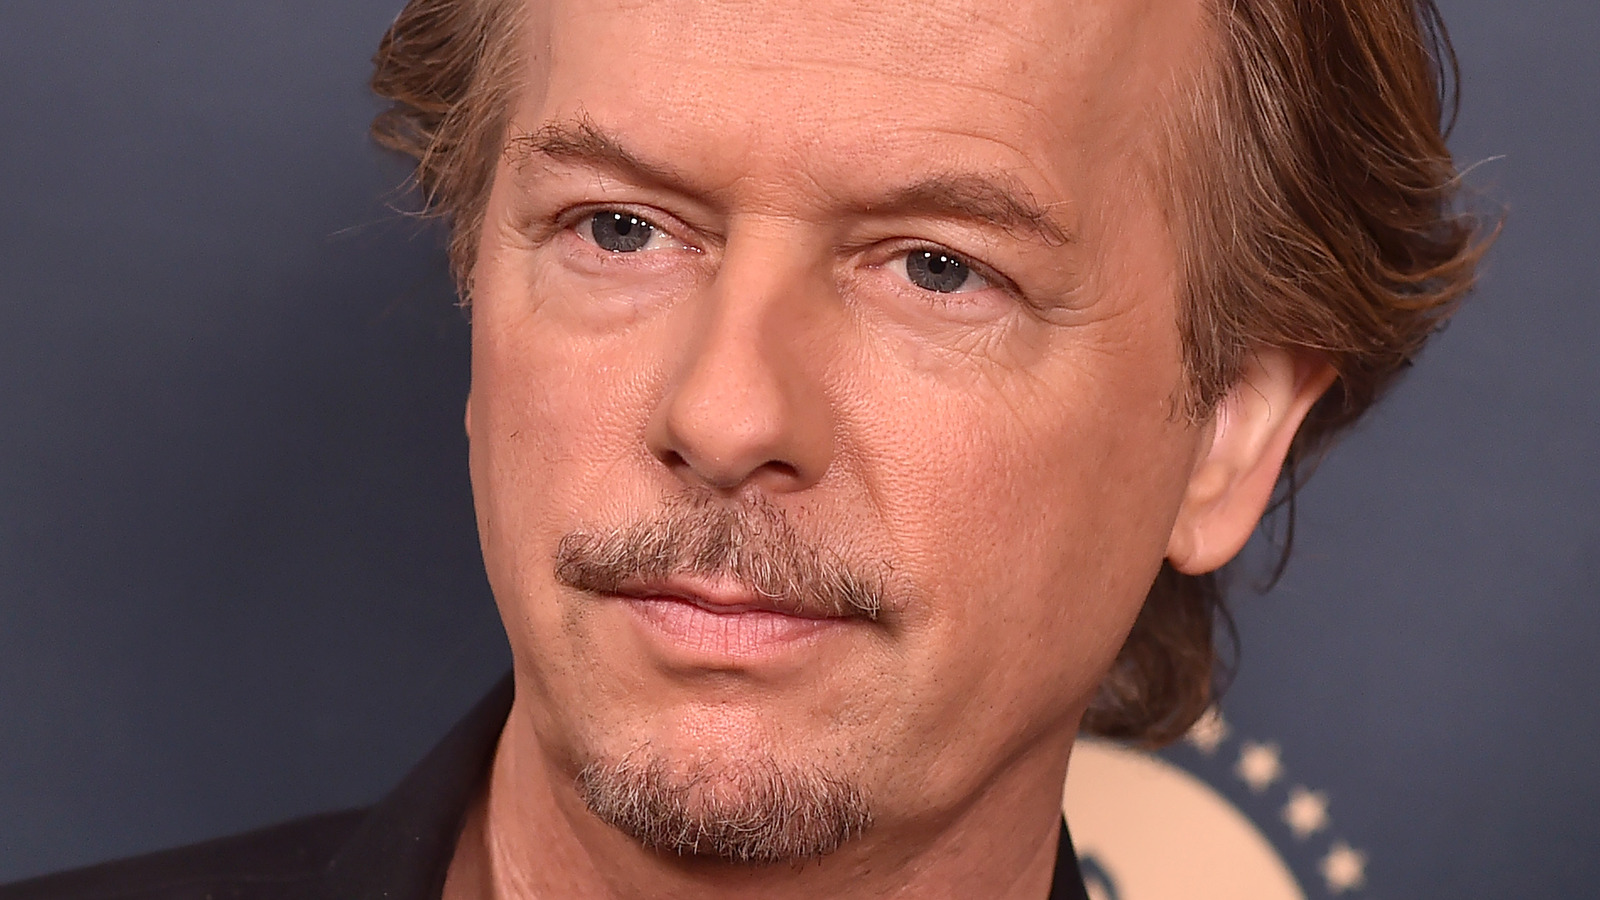 unknown facts about david spade